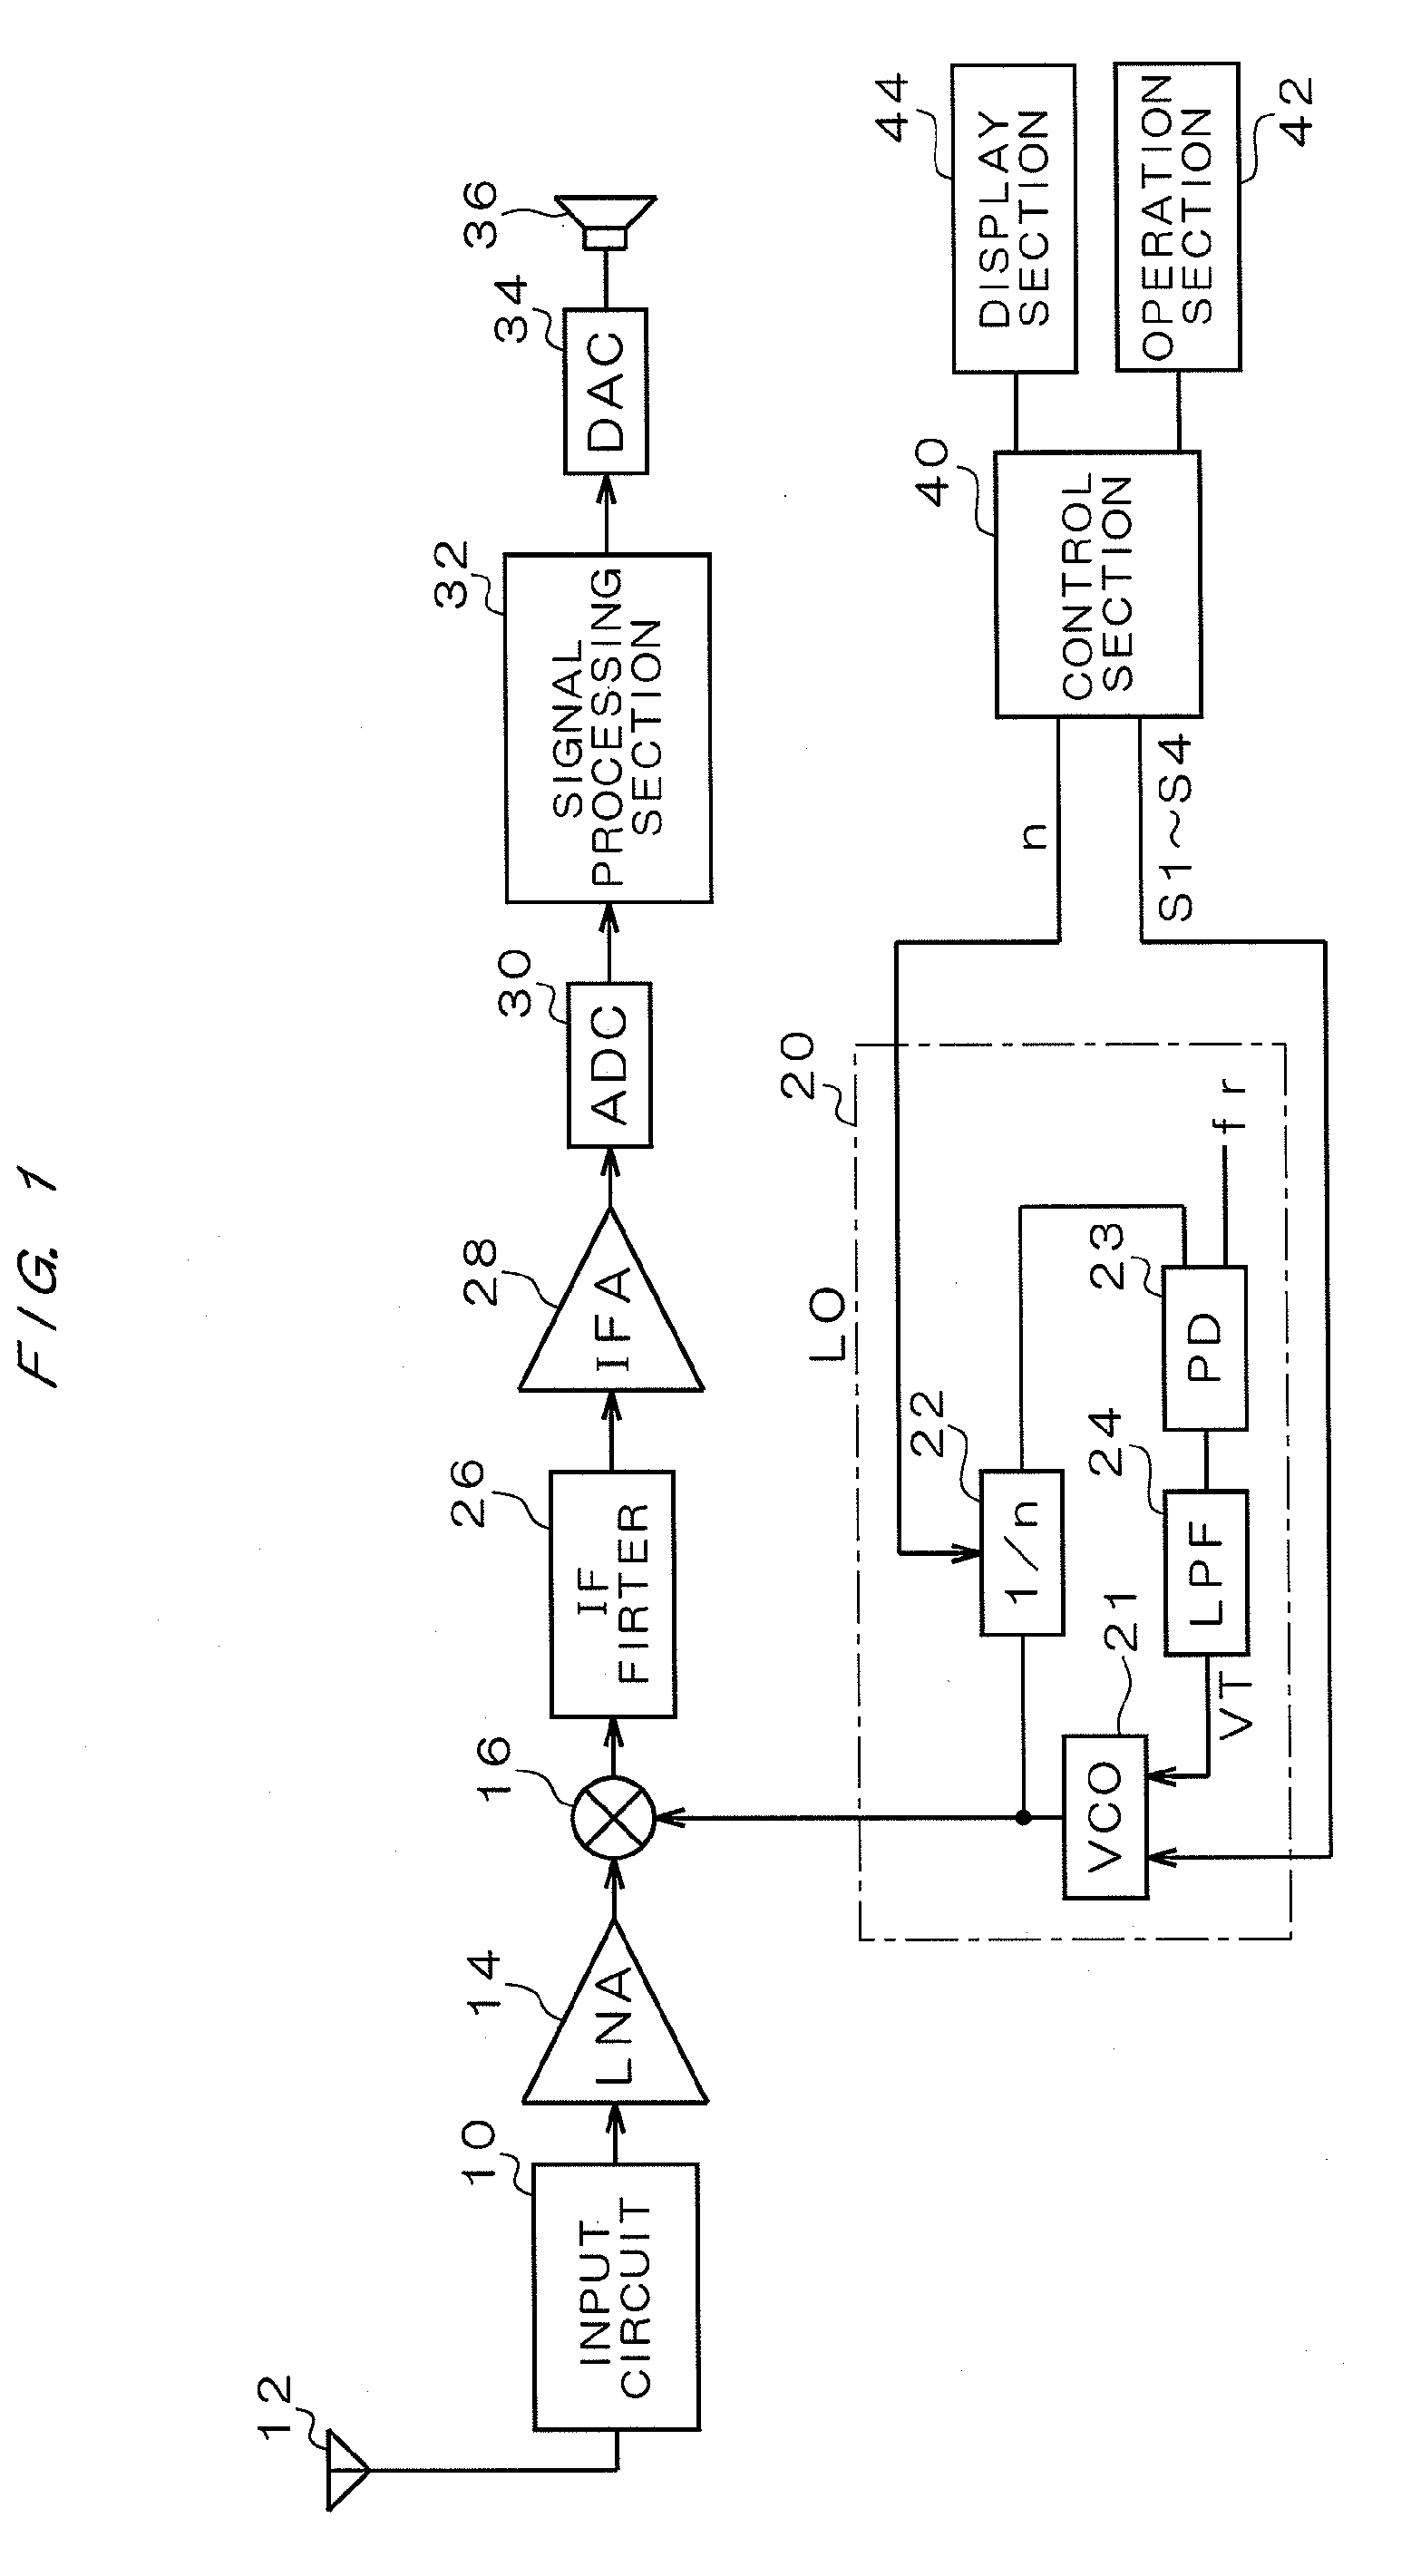 Oscillator, pll circuit, receiver and transmitter